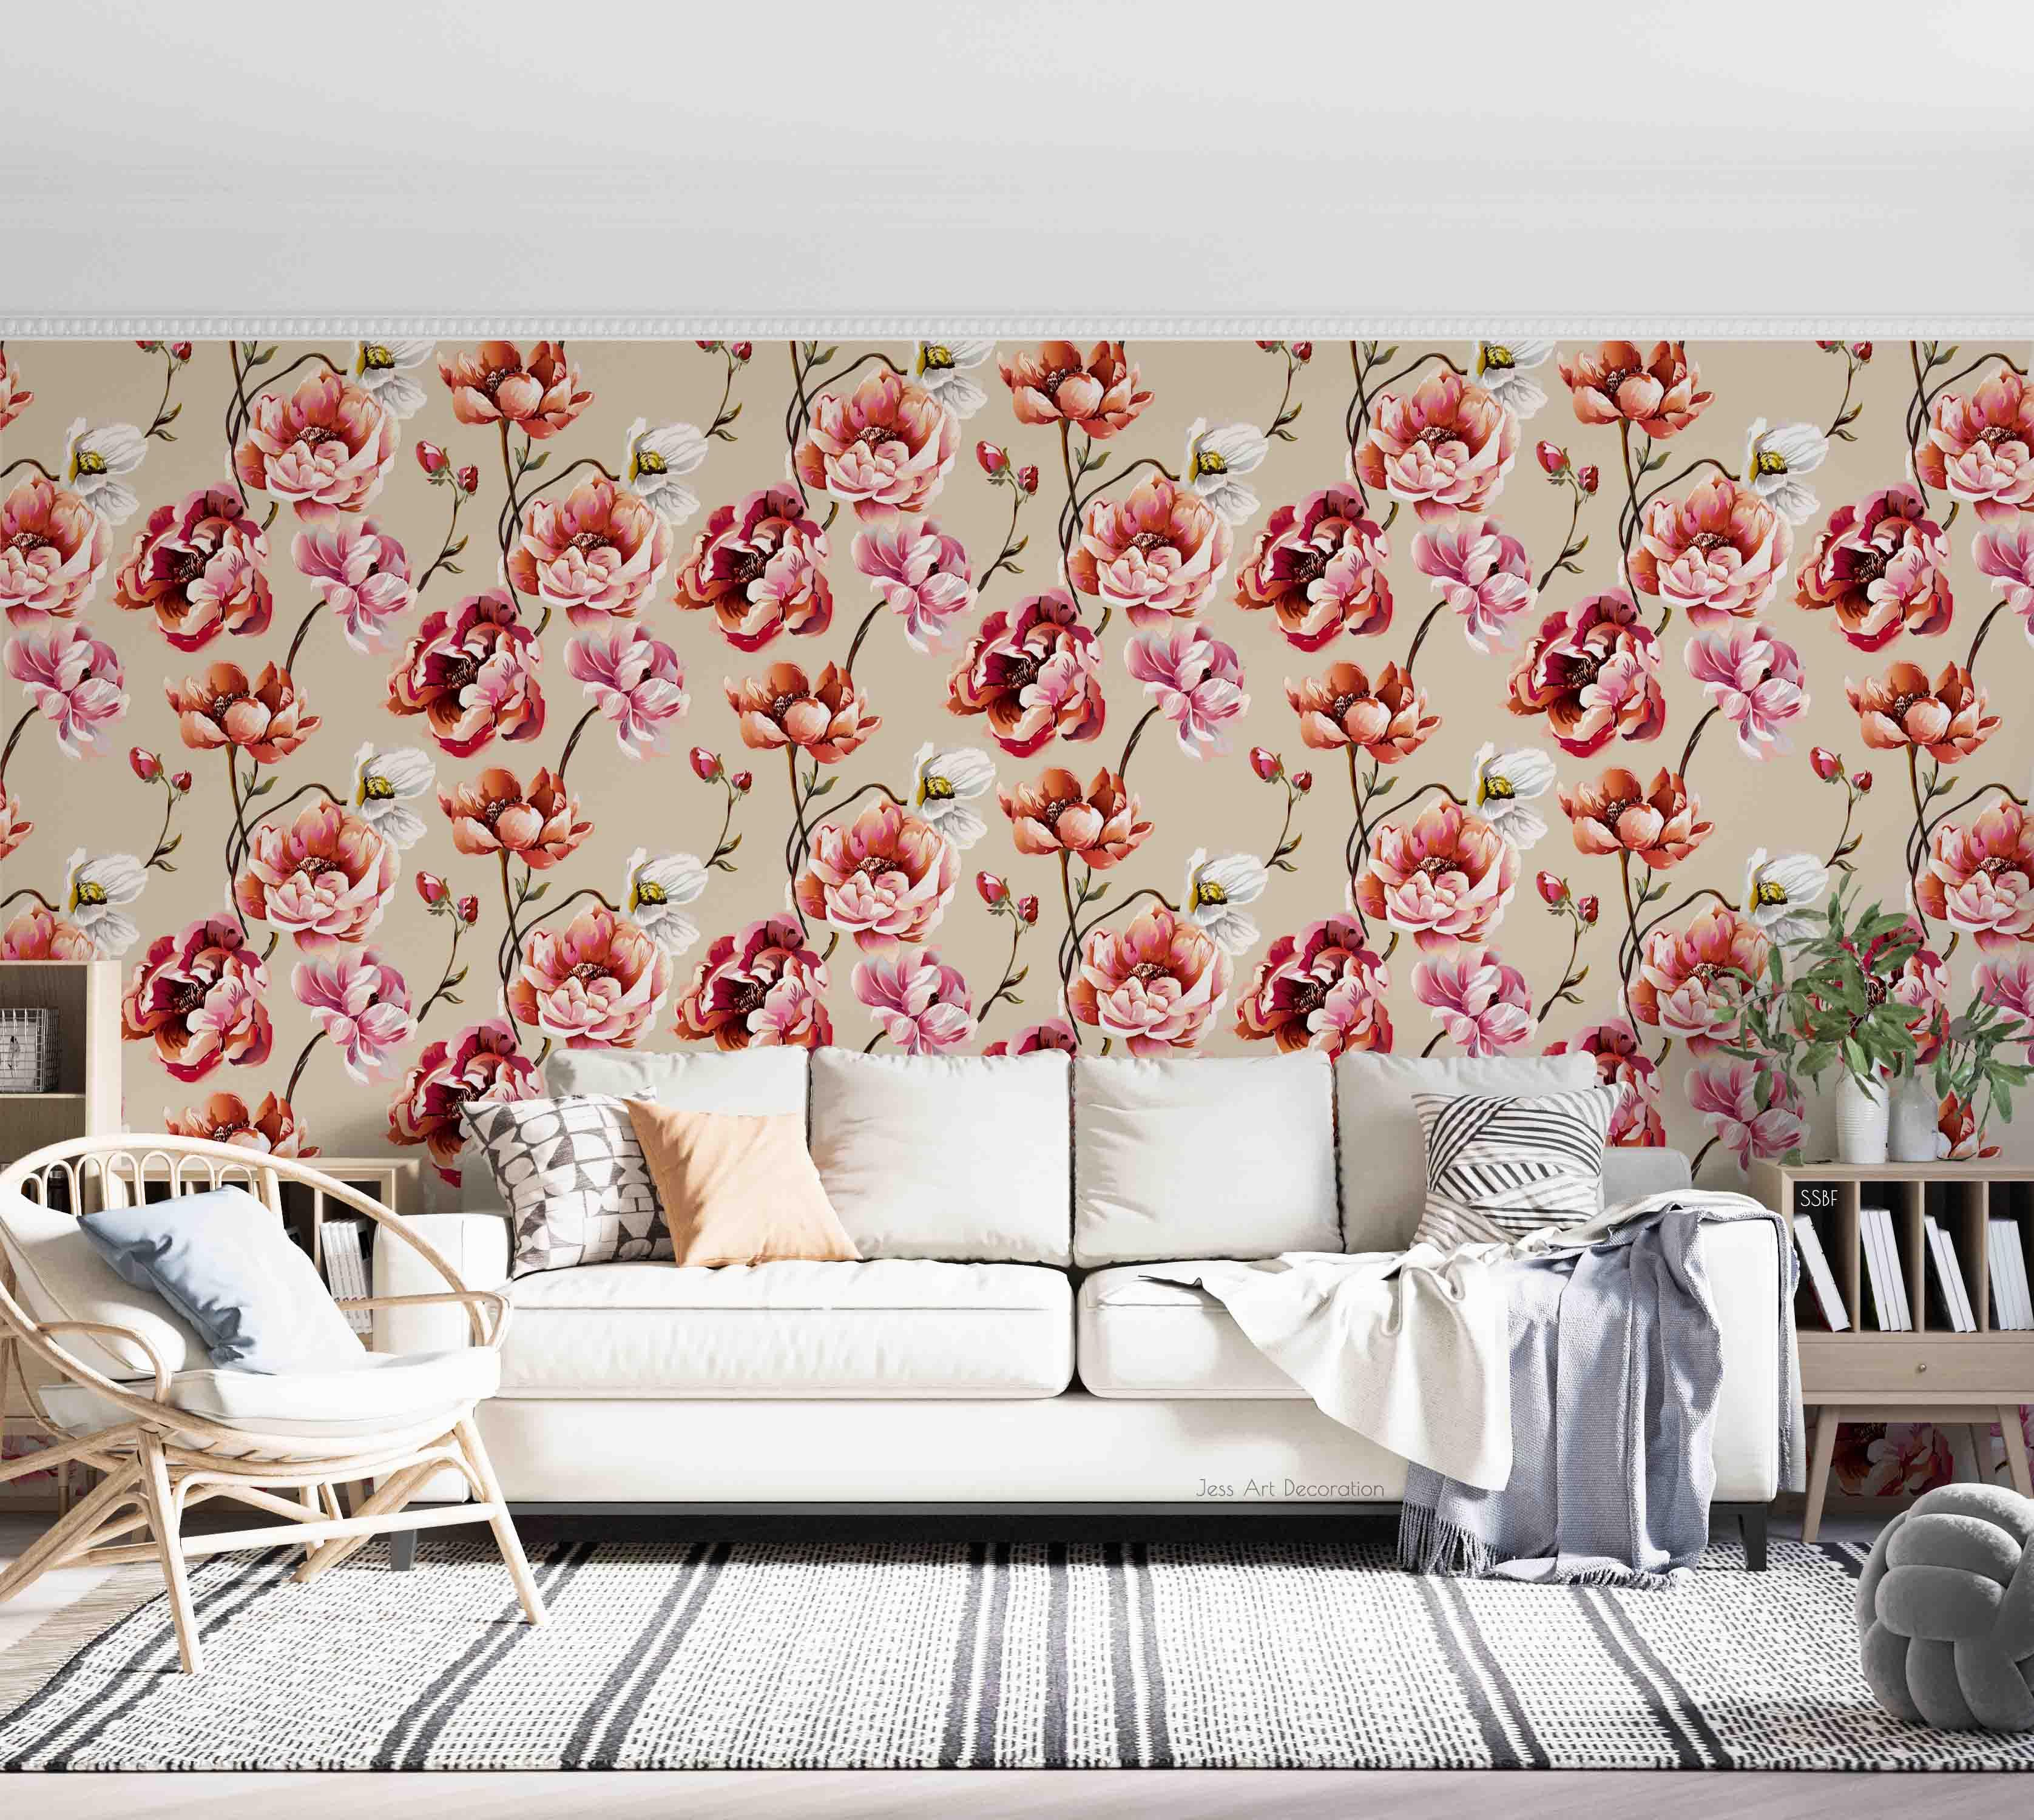 3D Vintage Baroque Art Blooming Pink Peony Watercolor Background Wall Mural Wallpaper GD 3573- Jess Art Decoration